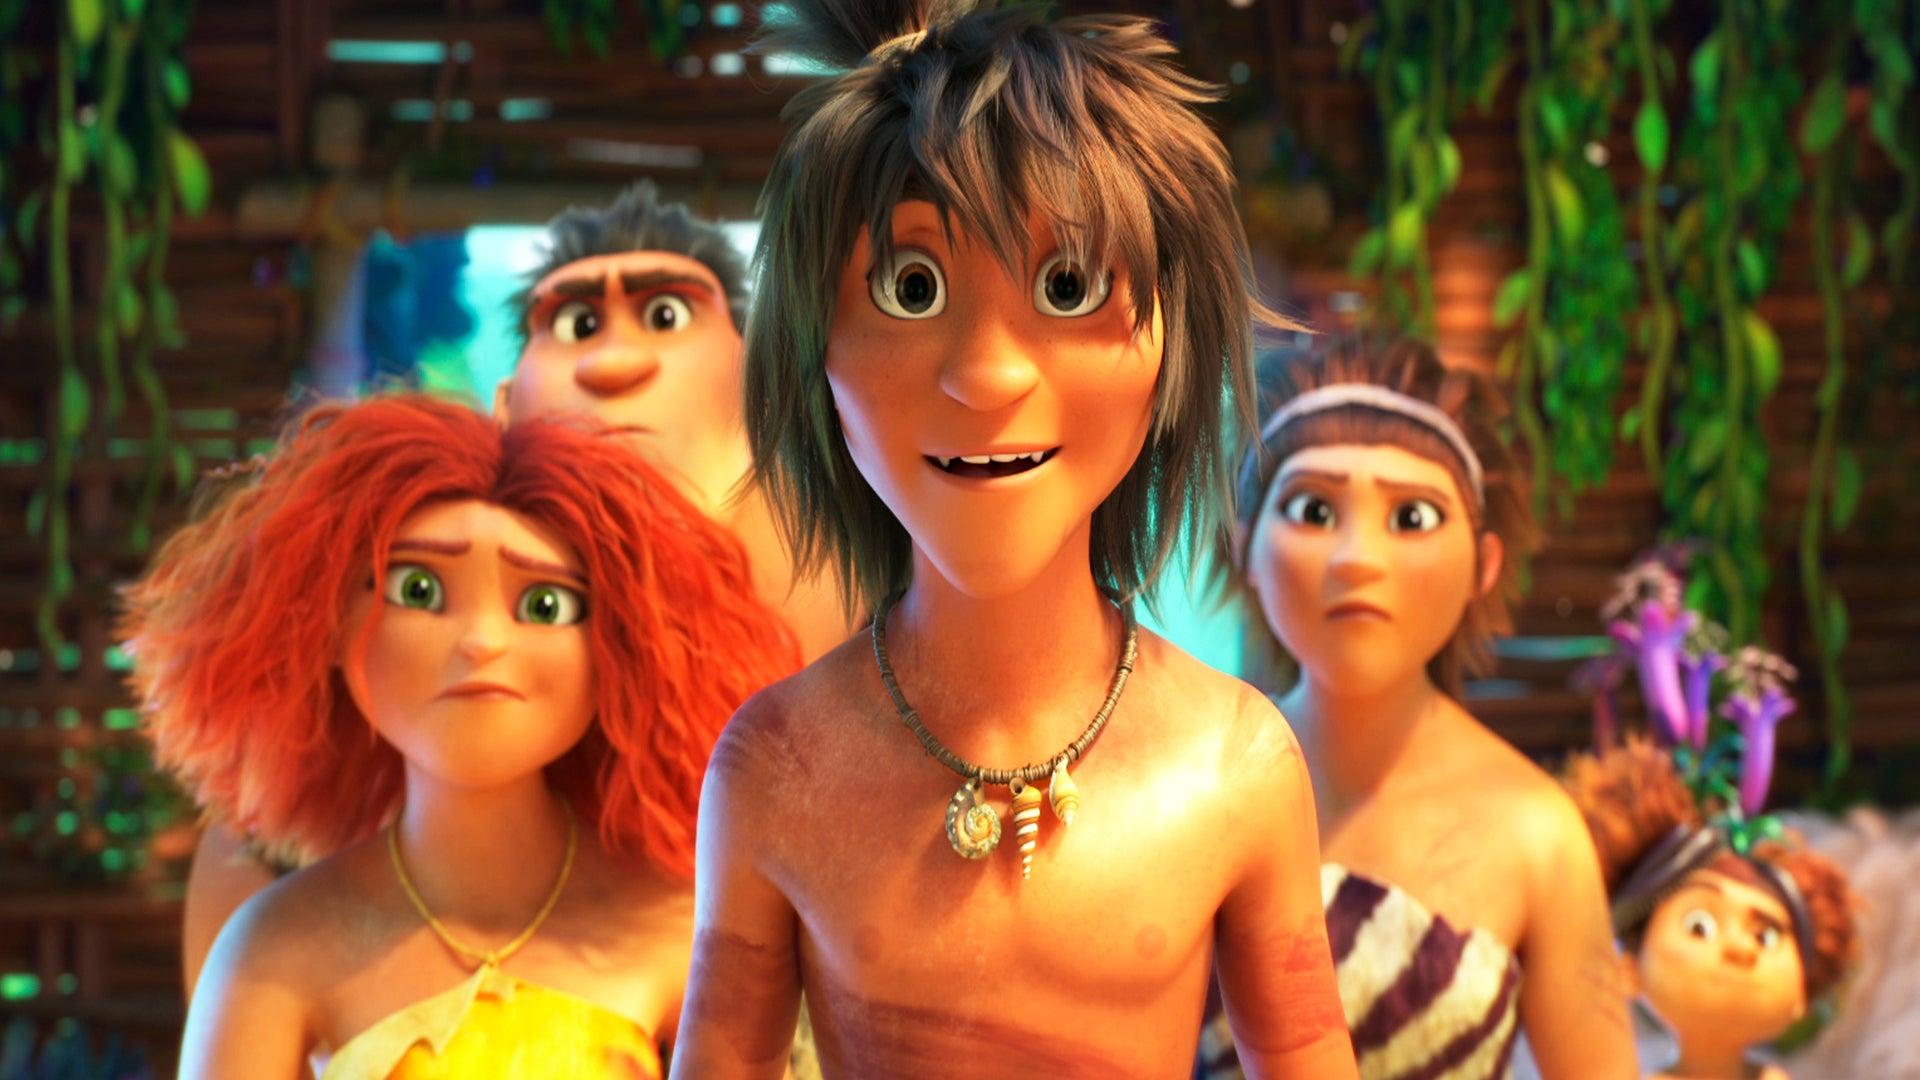 IGN out this exclusive clip from The Croods: A New Age, featuring the voices of Nicolas Cage, Emma Stone, Ryan Reynolds & Kelly Marie Tran